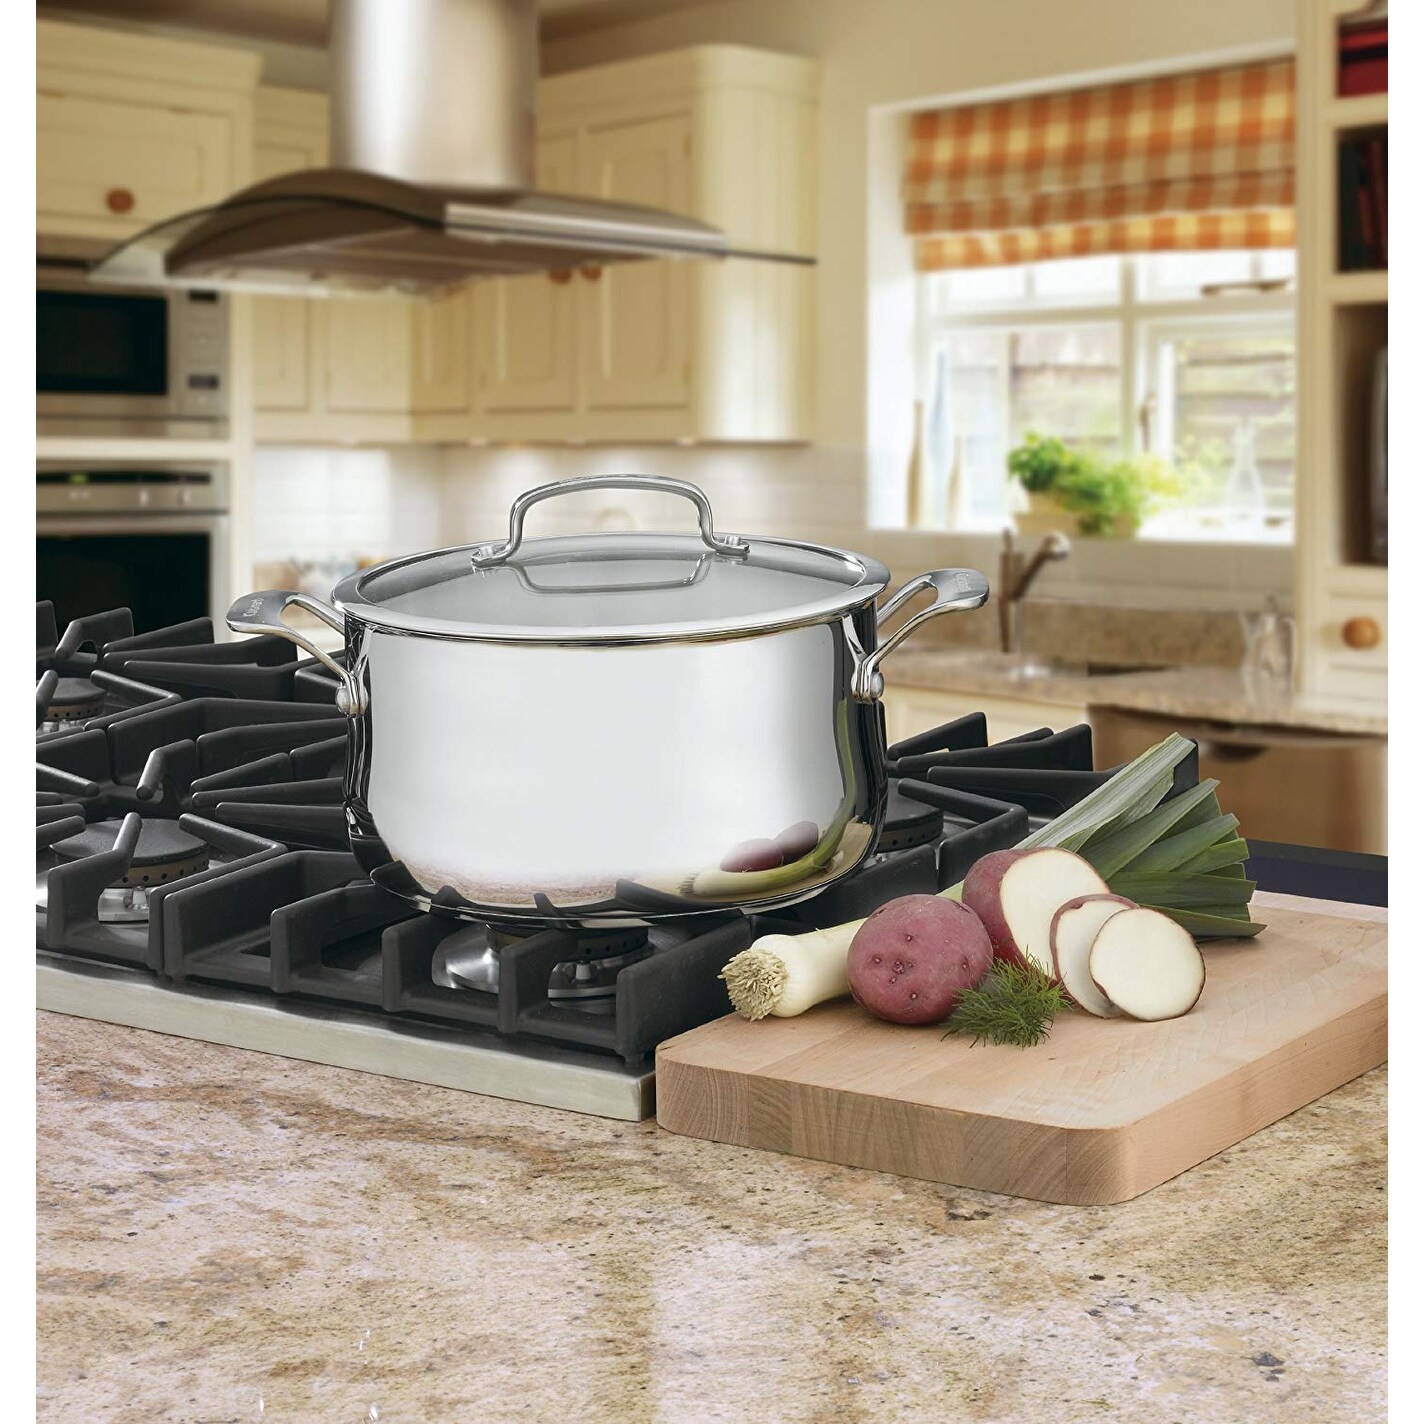 https://ak1.ostkcdn.com/images/products/is/images/direct/cd22d7cce51db18c61cc0e79cf27c5e214832bd1/Cuisinart-444-24-Contour-Stainless-6-Quart-Saucepot-with-Glass-Cover.jpg